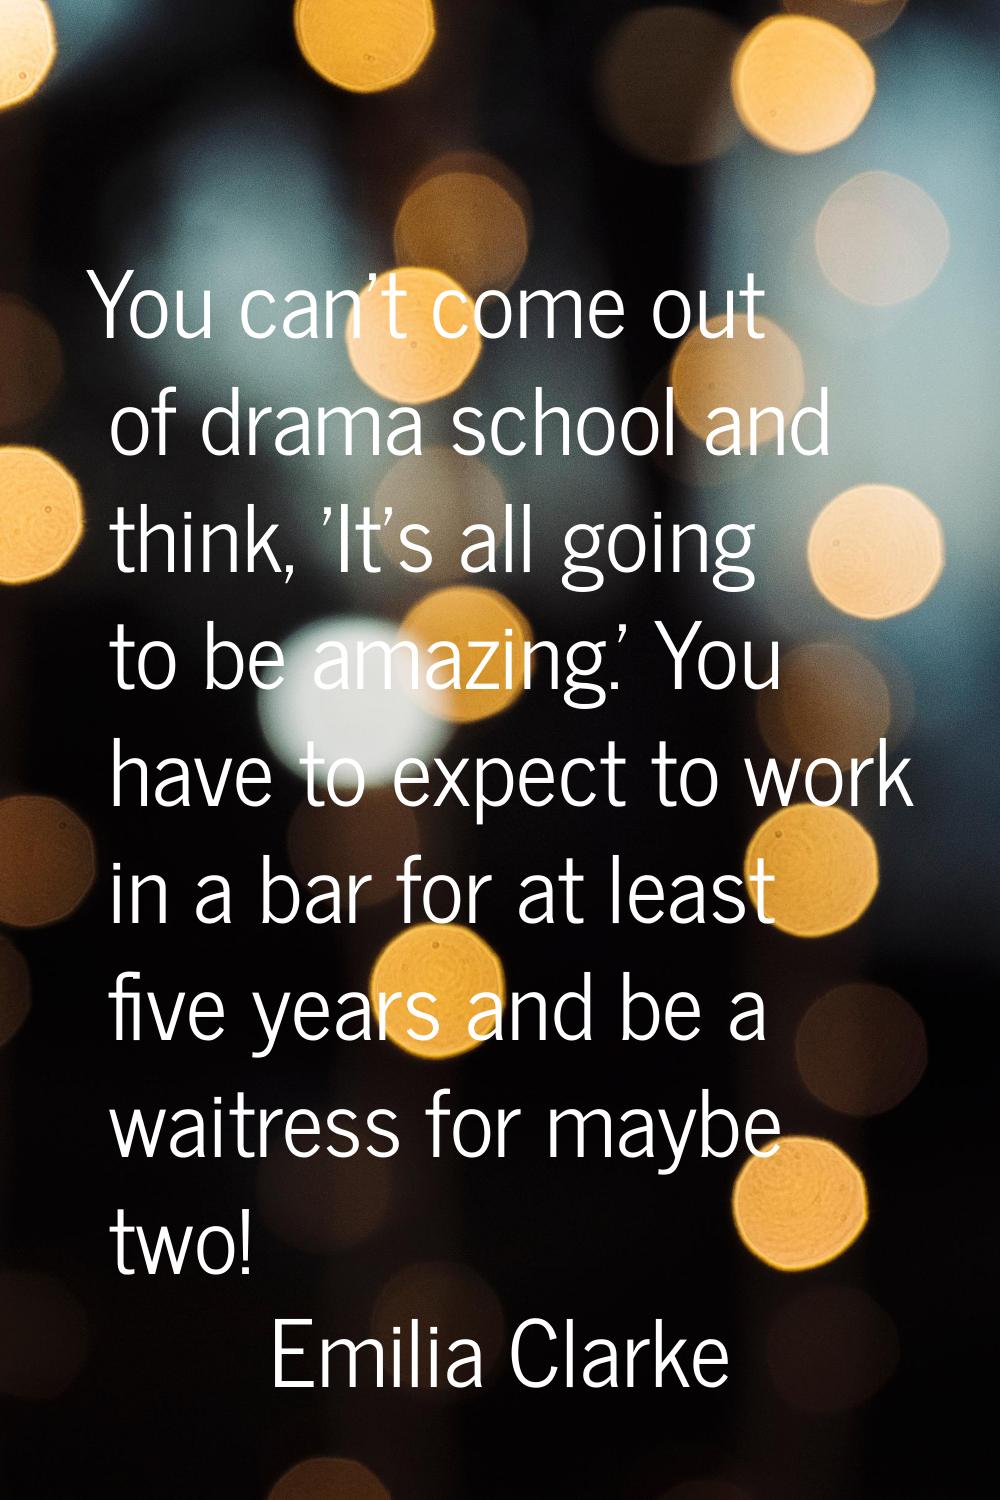 You can't come out of drama school and think, 'It's all going to be amazing.' You have to expect to